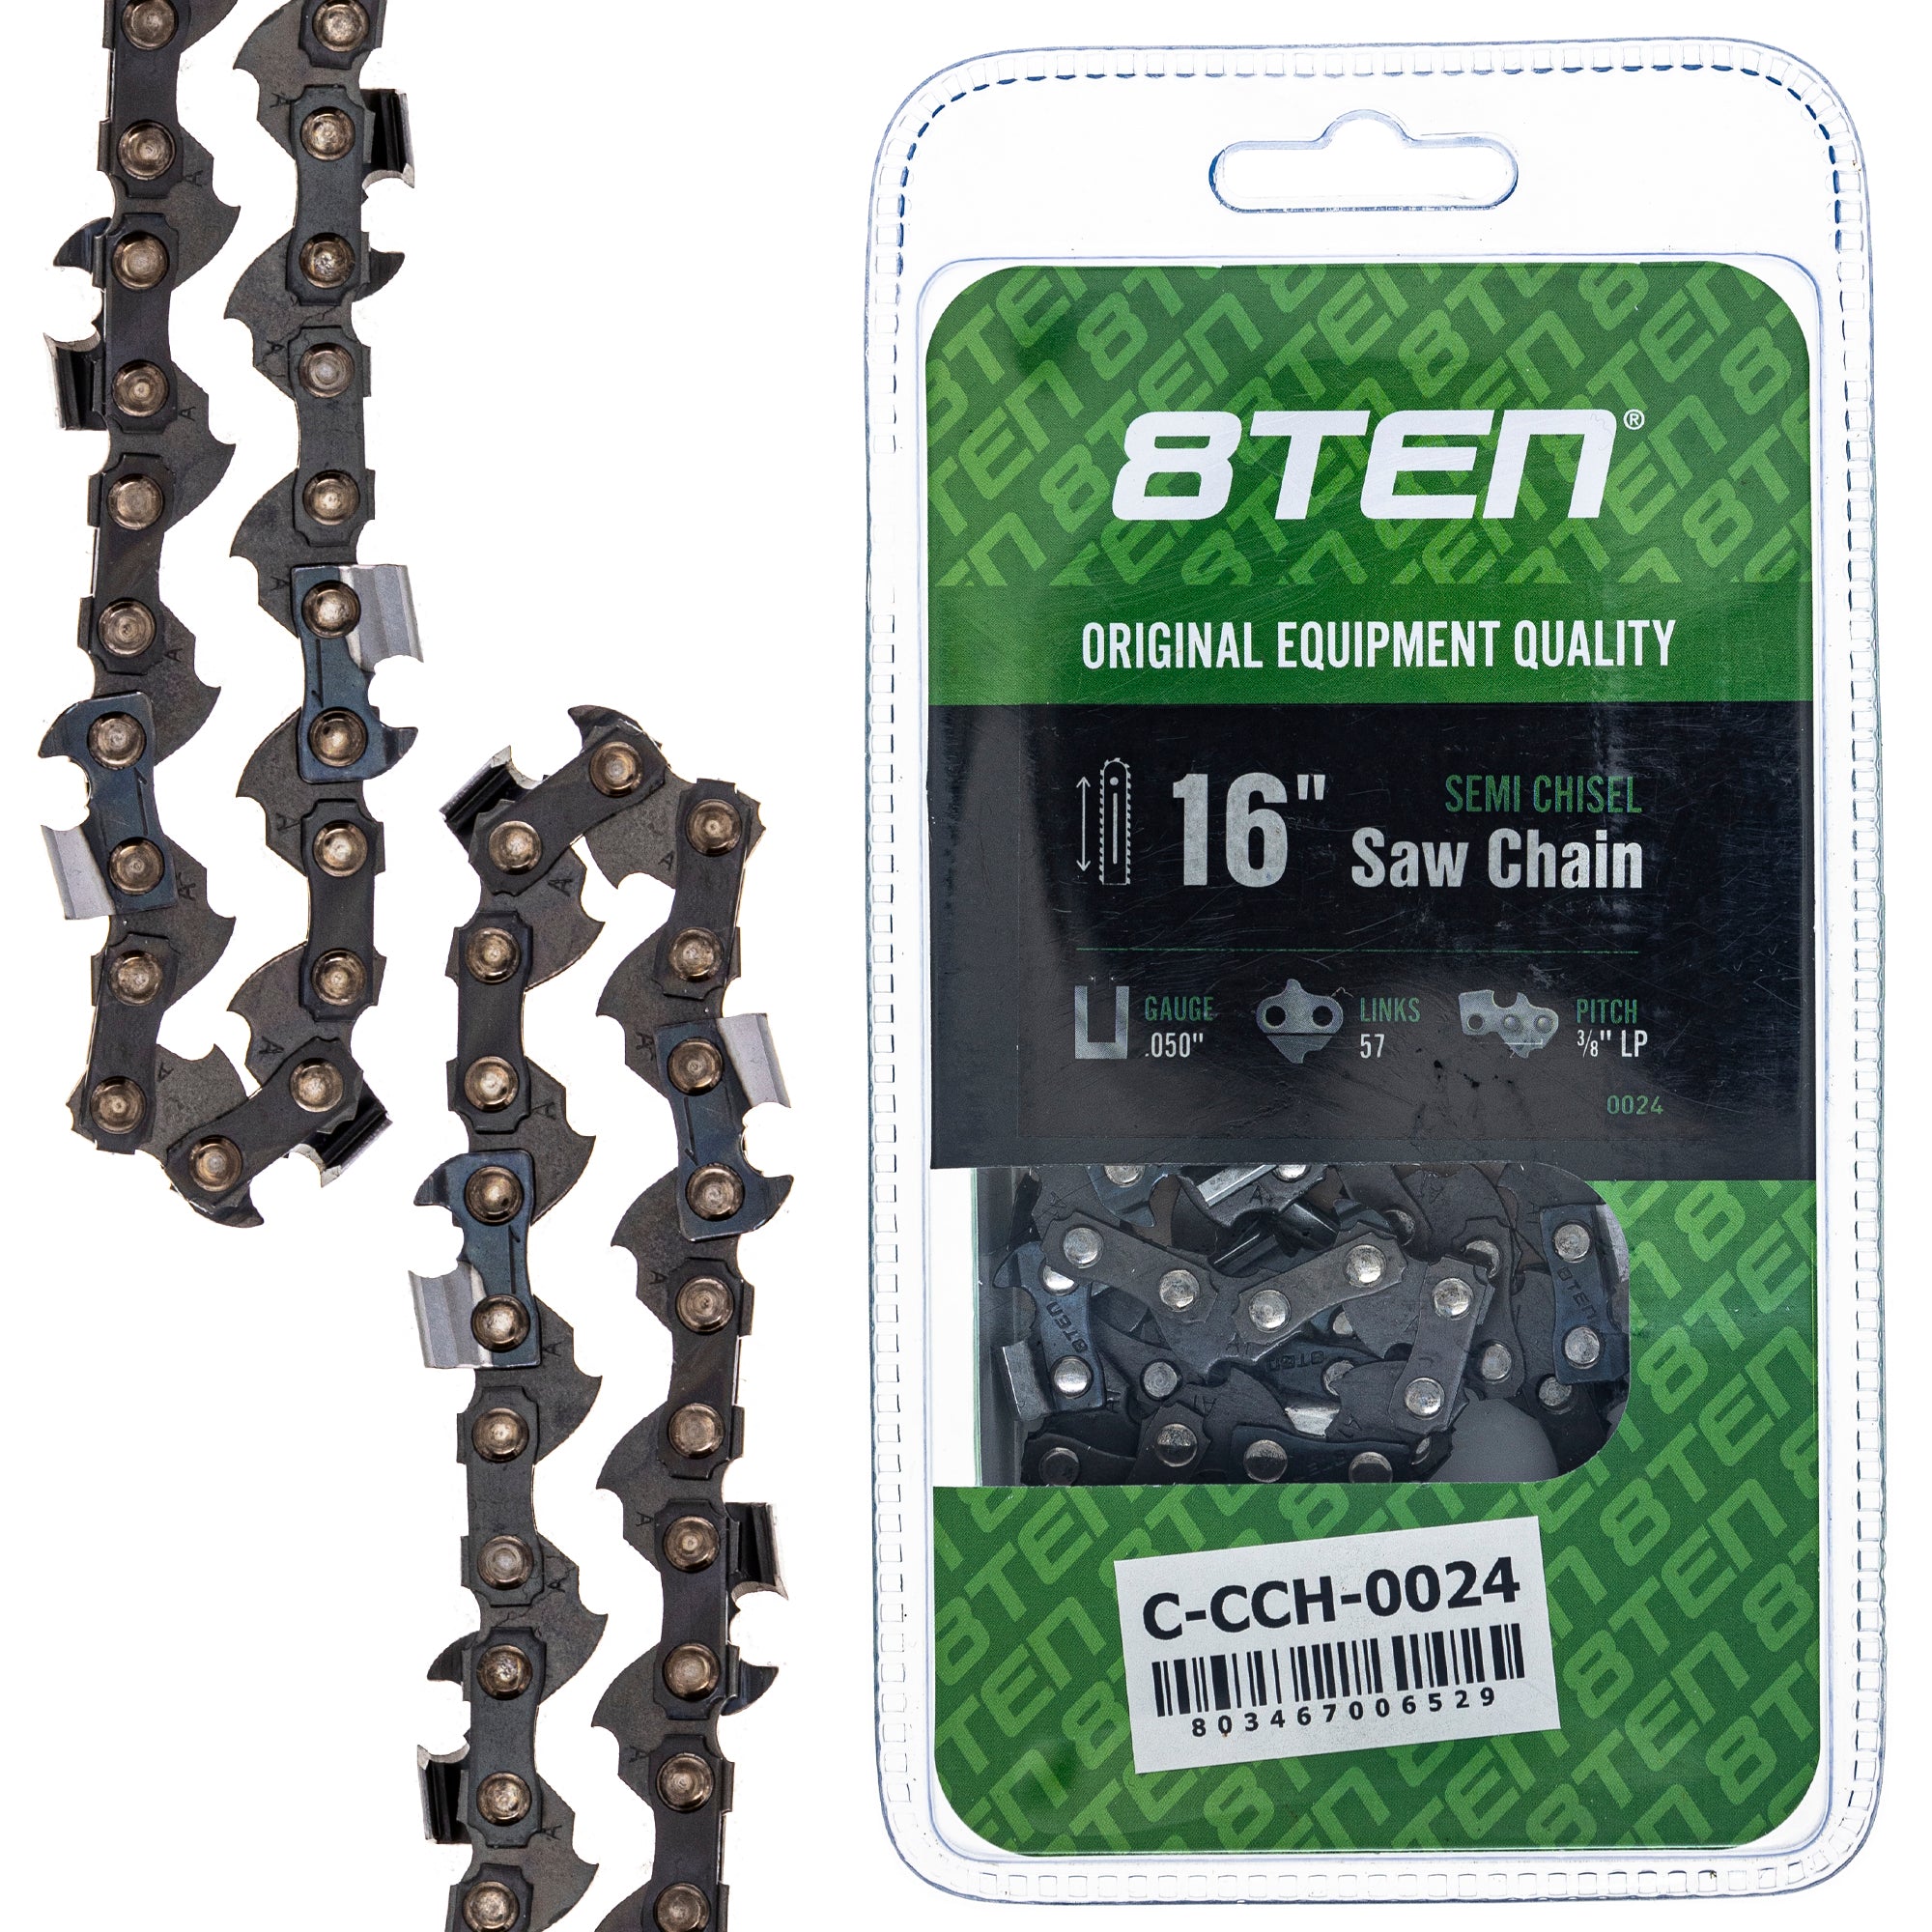 8TEN 810-CCC2246H Chain 3-Pack for zOTHER Windsor Stens Oregon GB